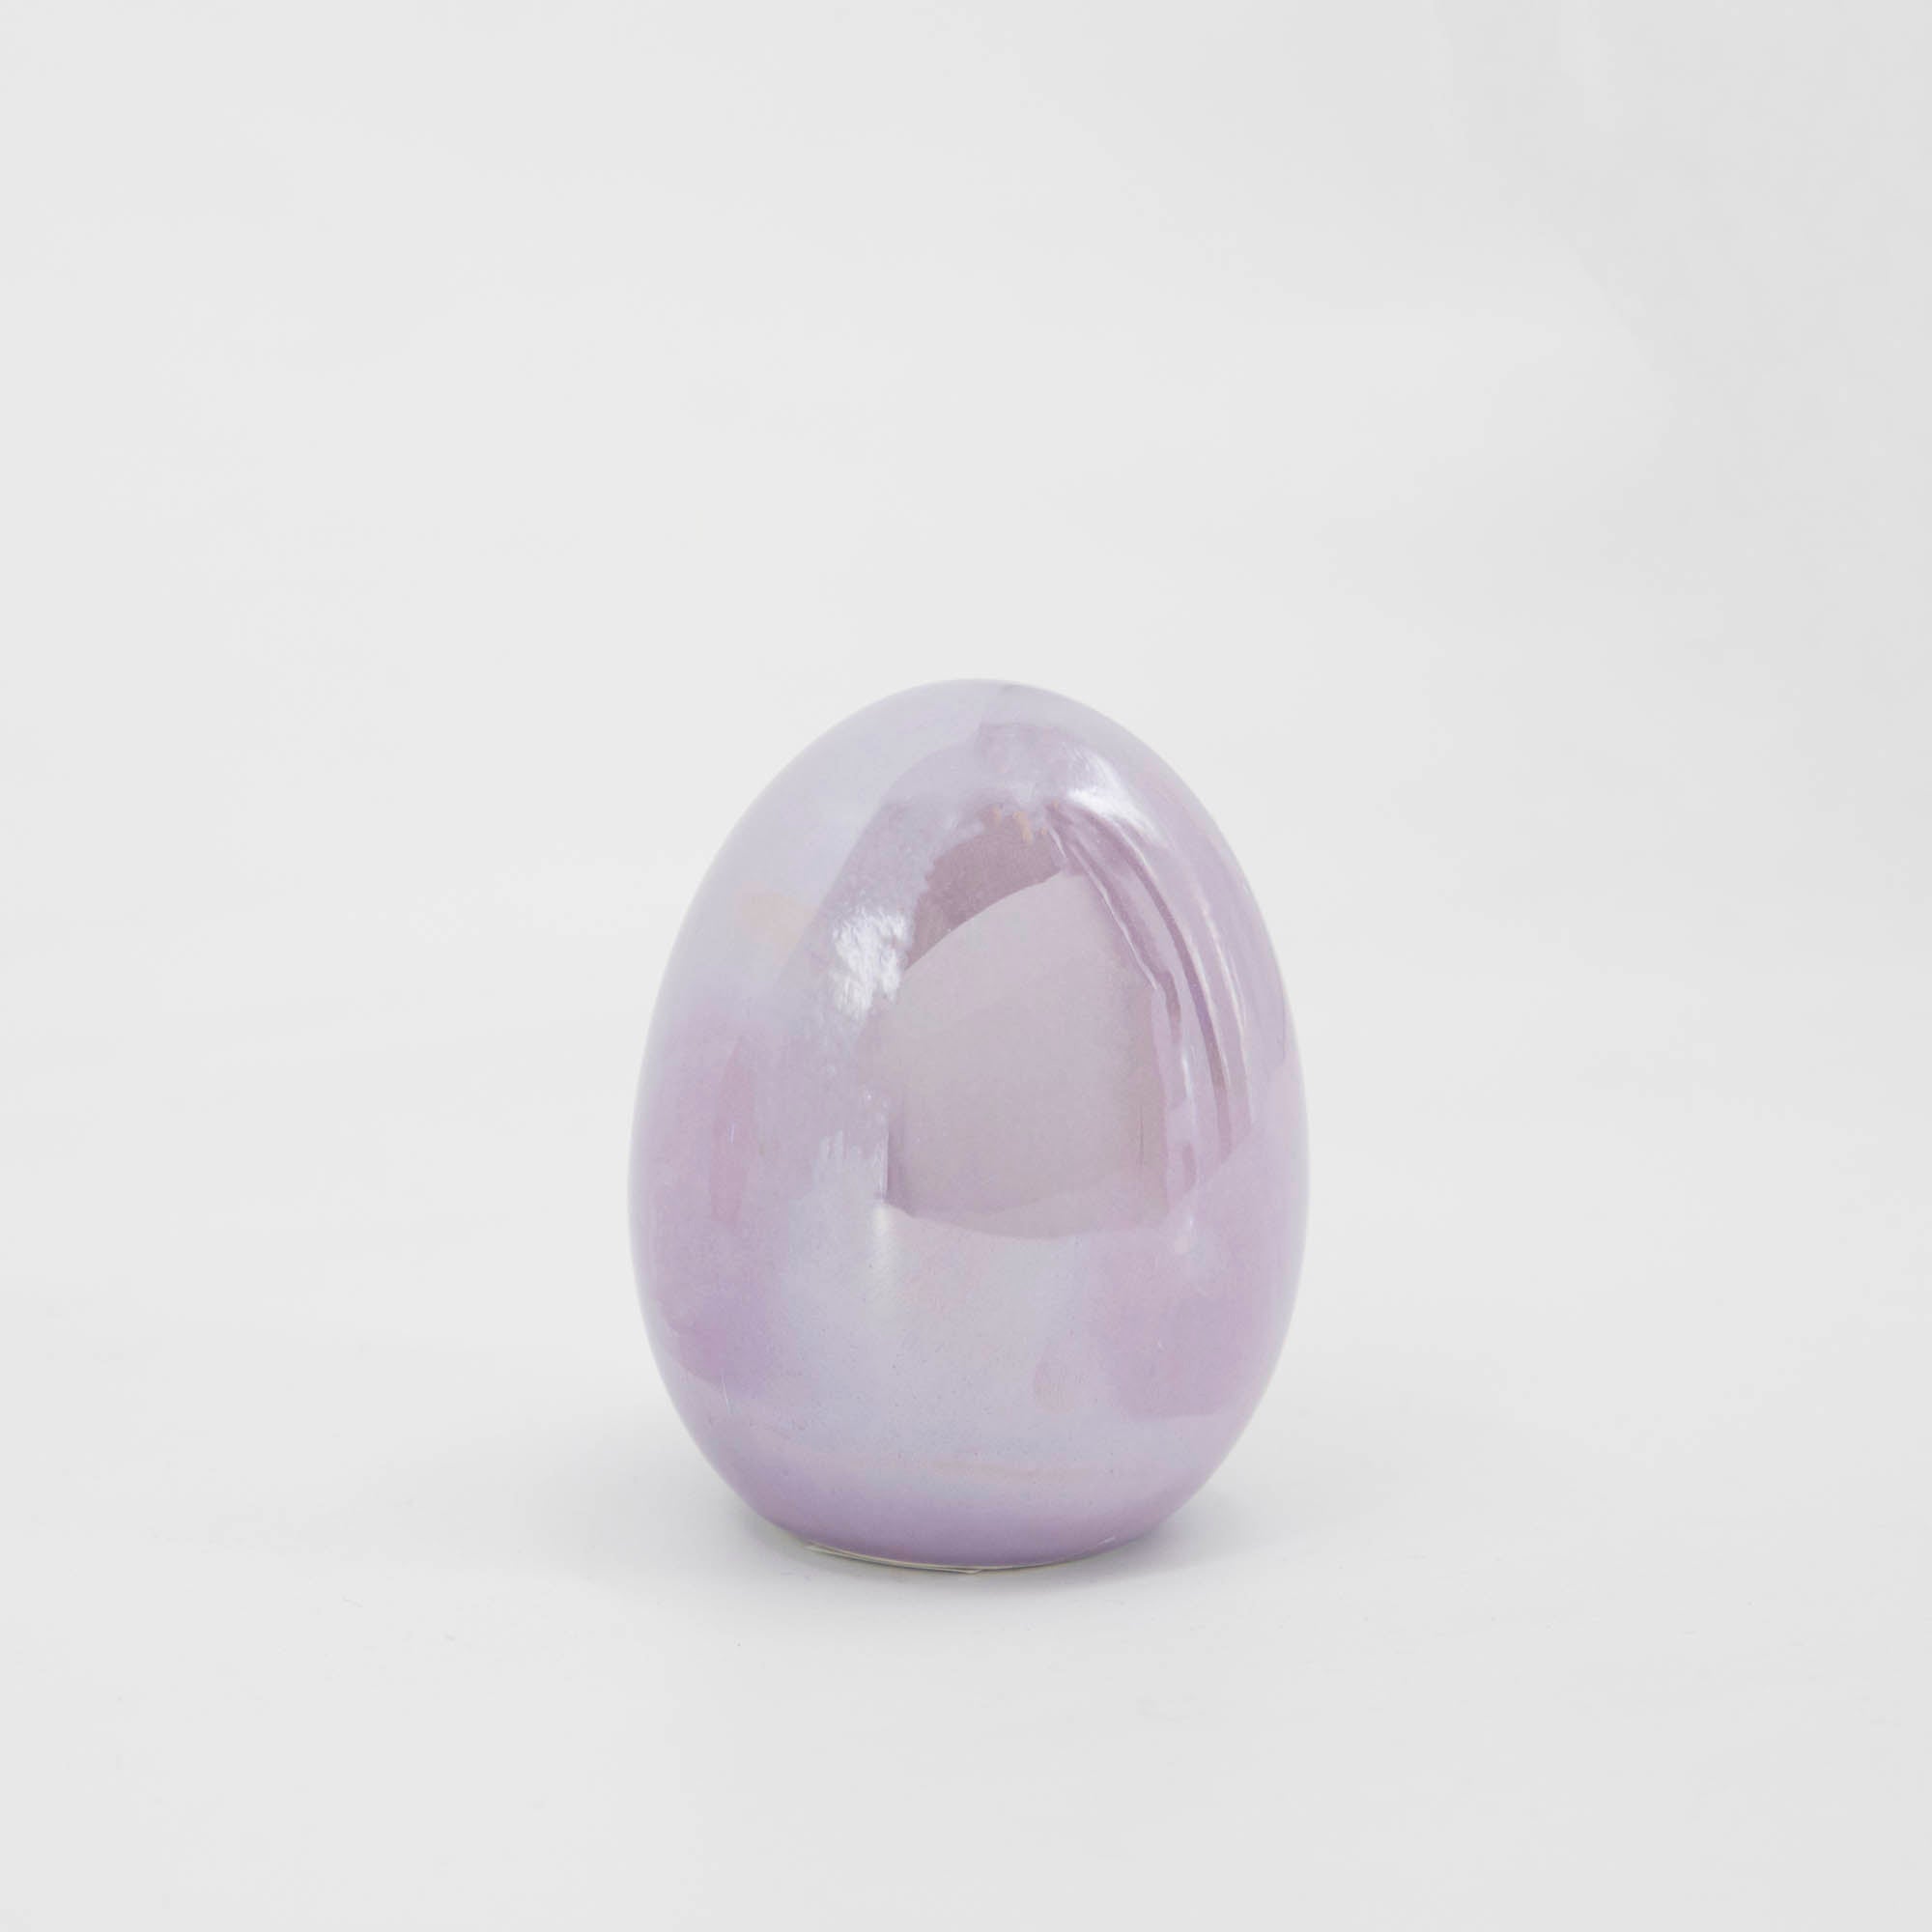 A small Glitterville iridescent egg sitting on a white surface.